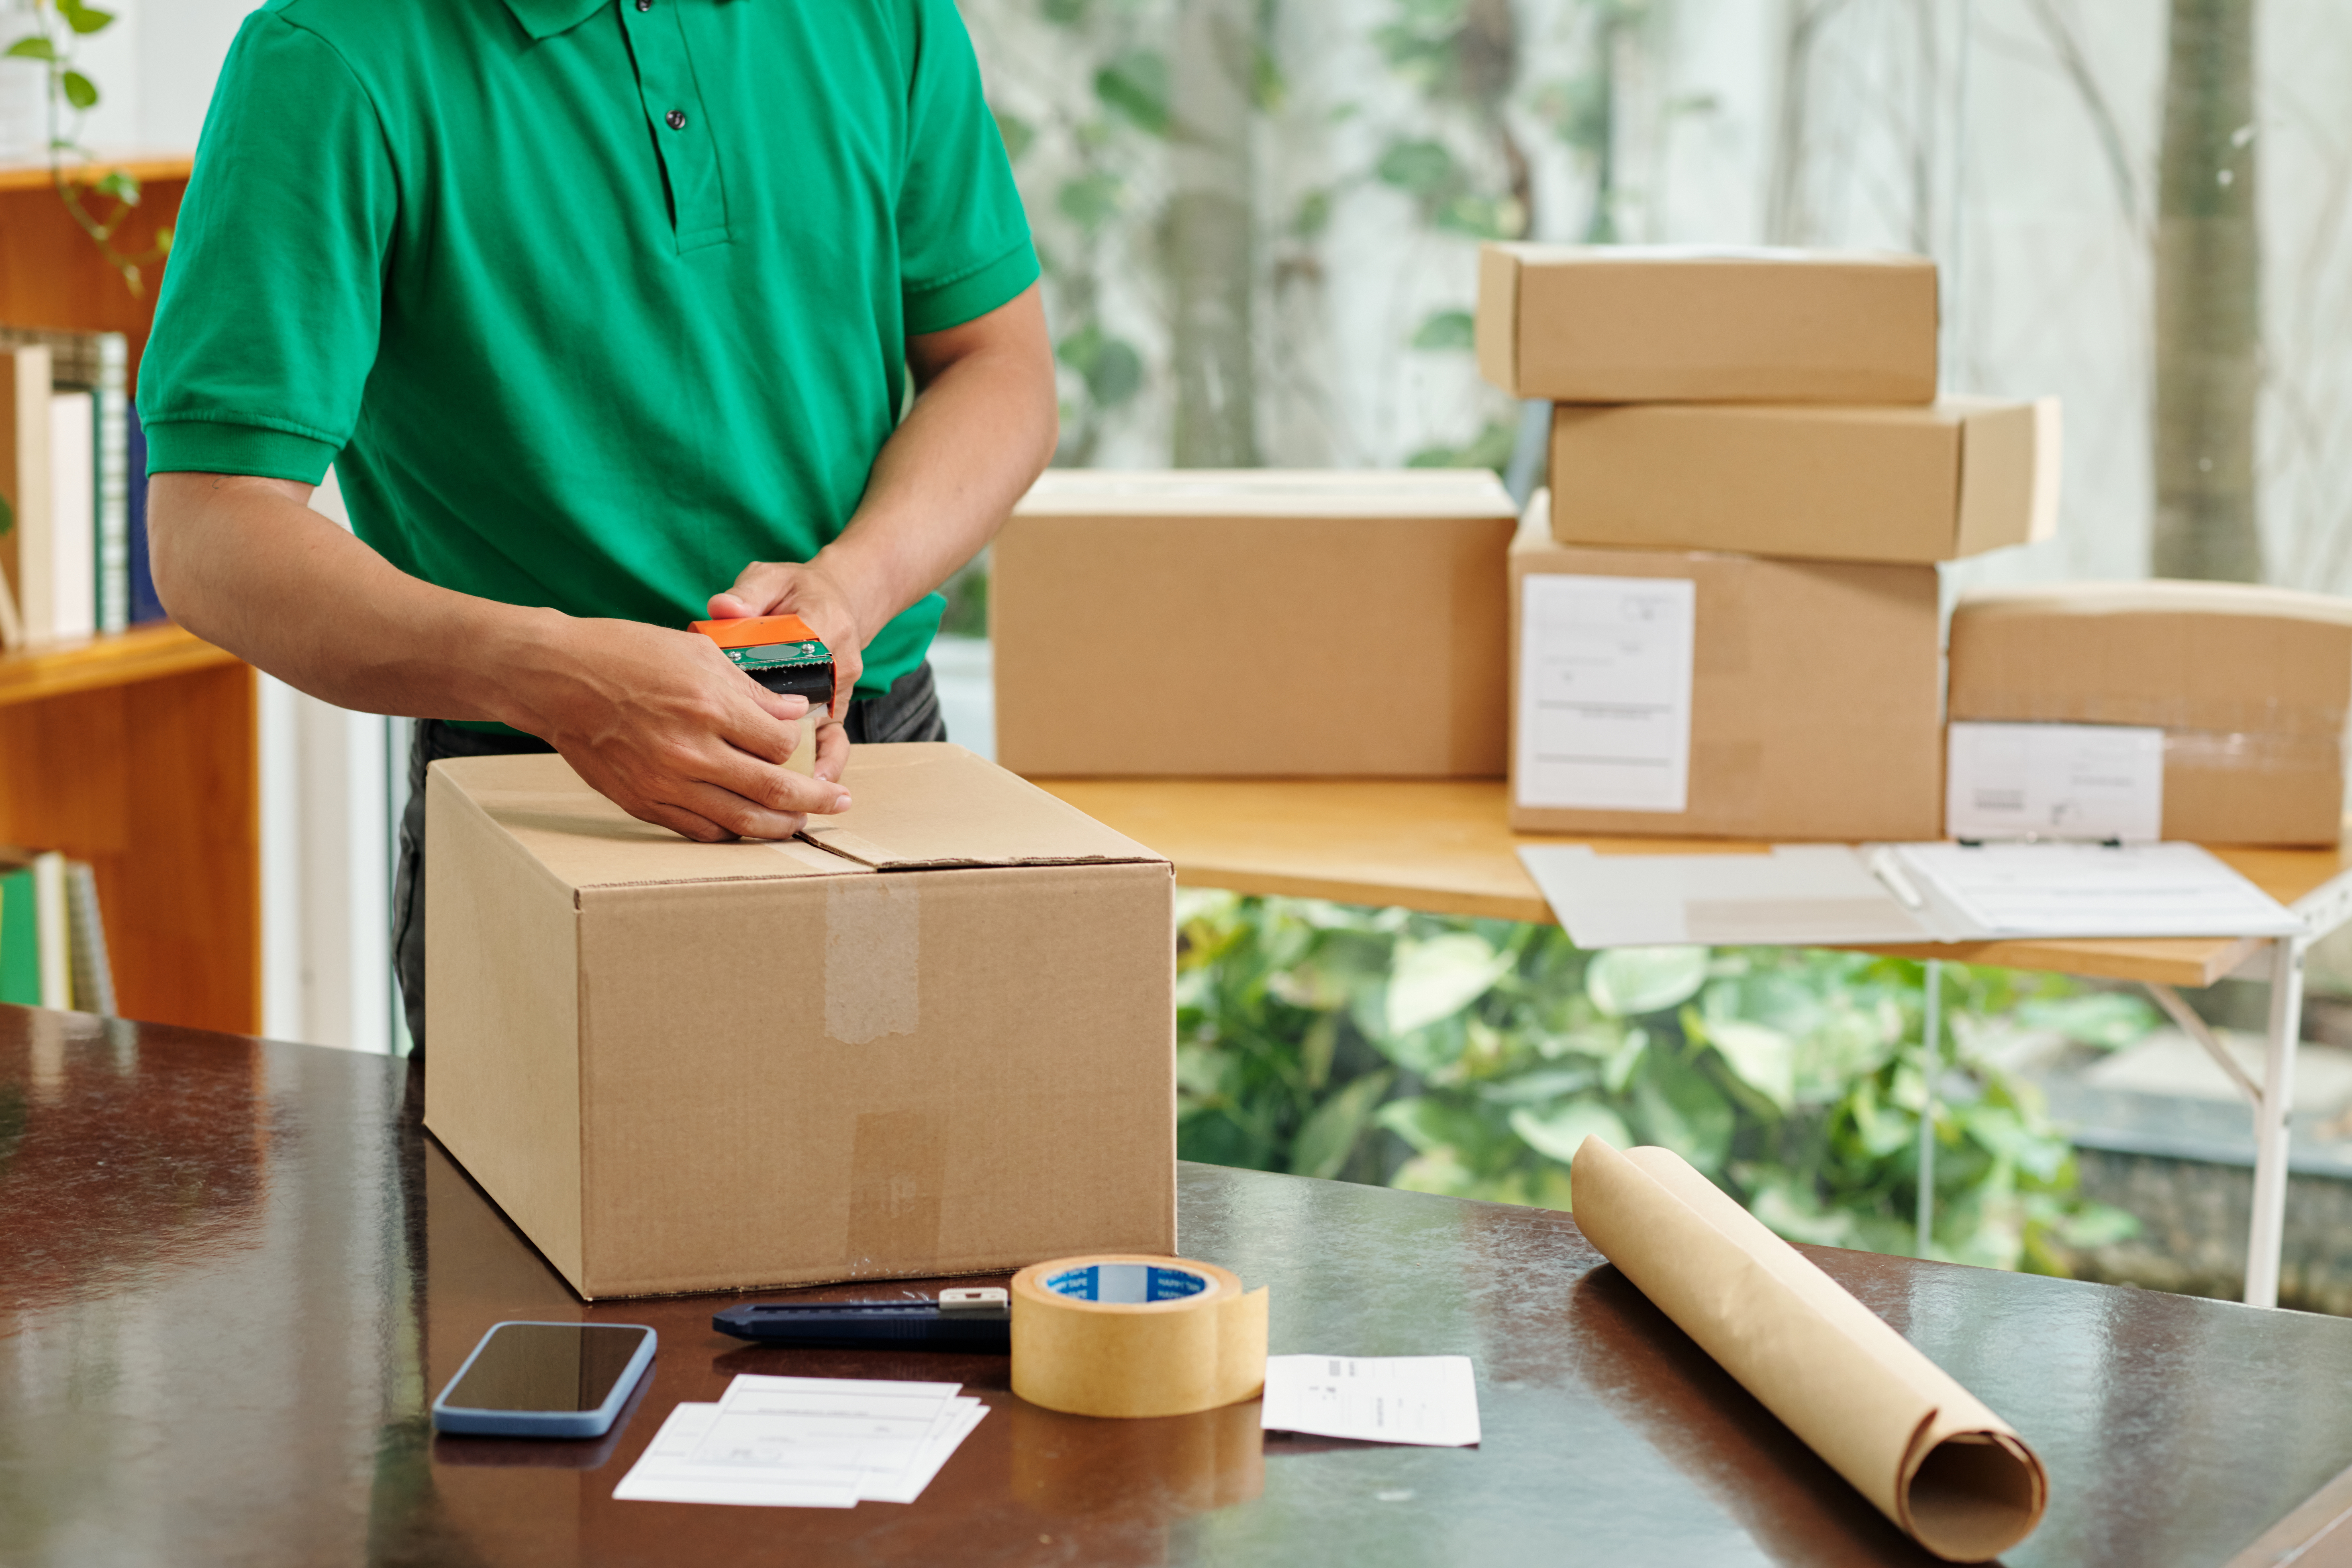 Packing and Shipping Services: 5 Things We Bet You Didn’t Know